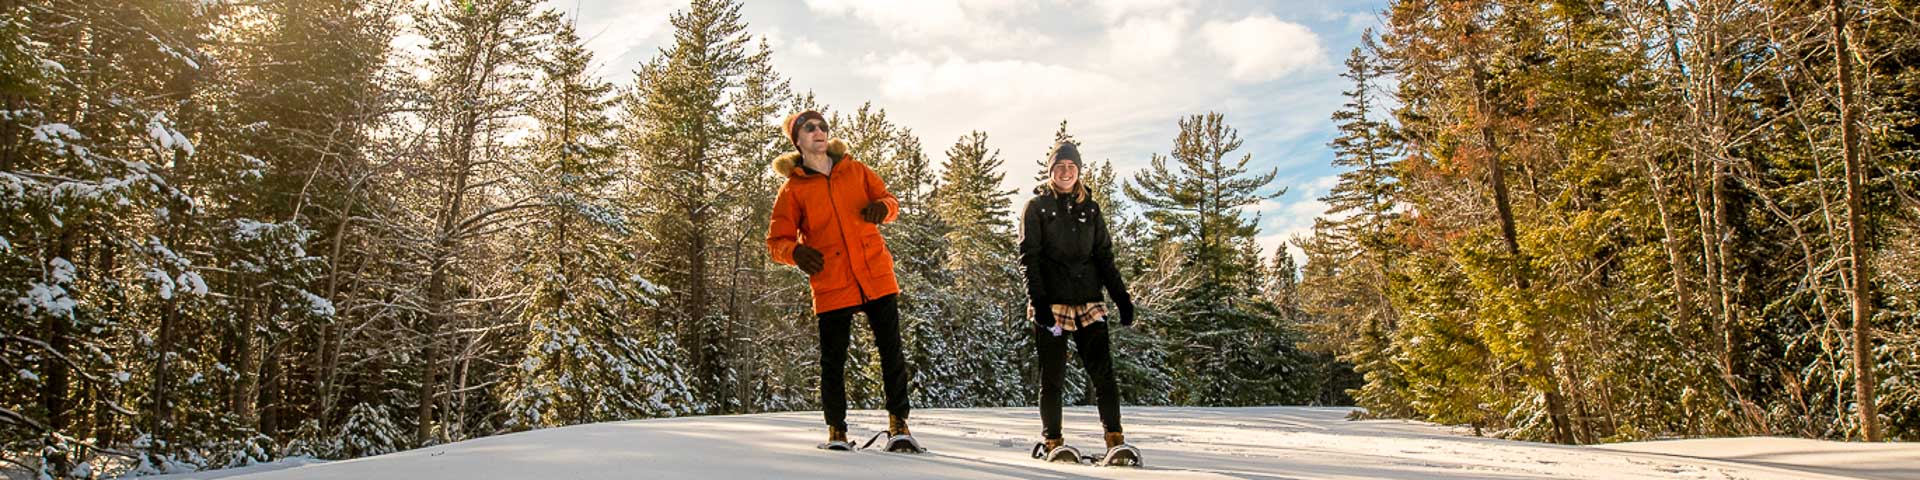 A couple snowshoeing in the forest